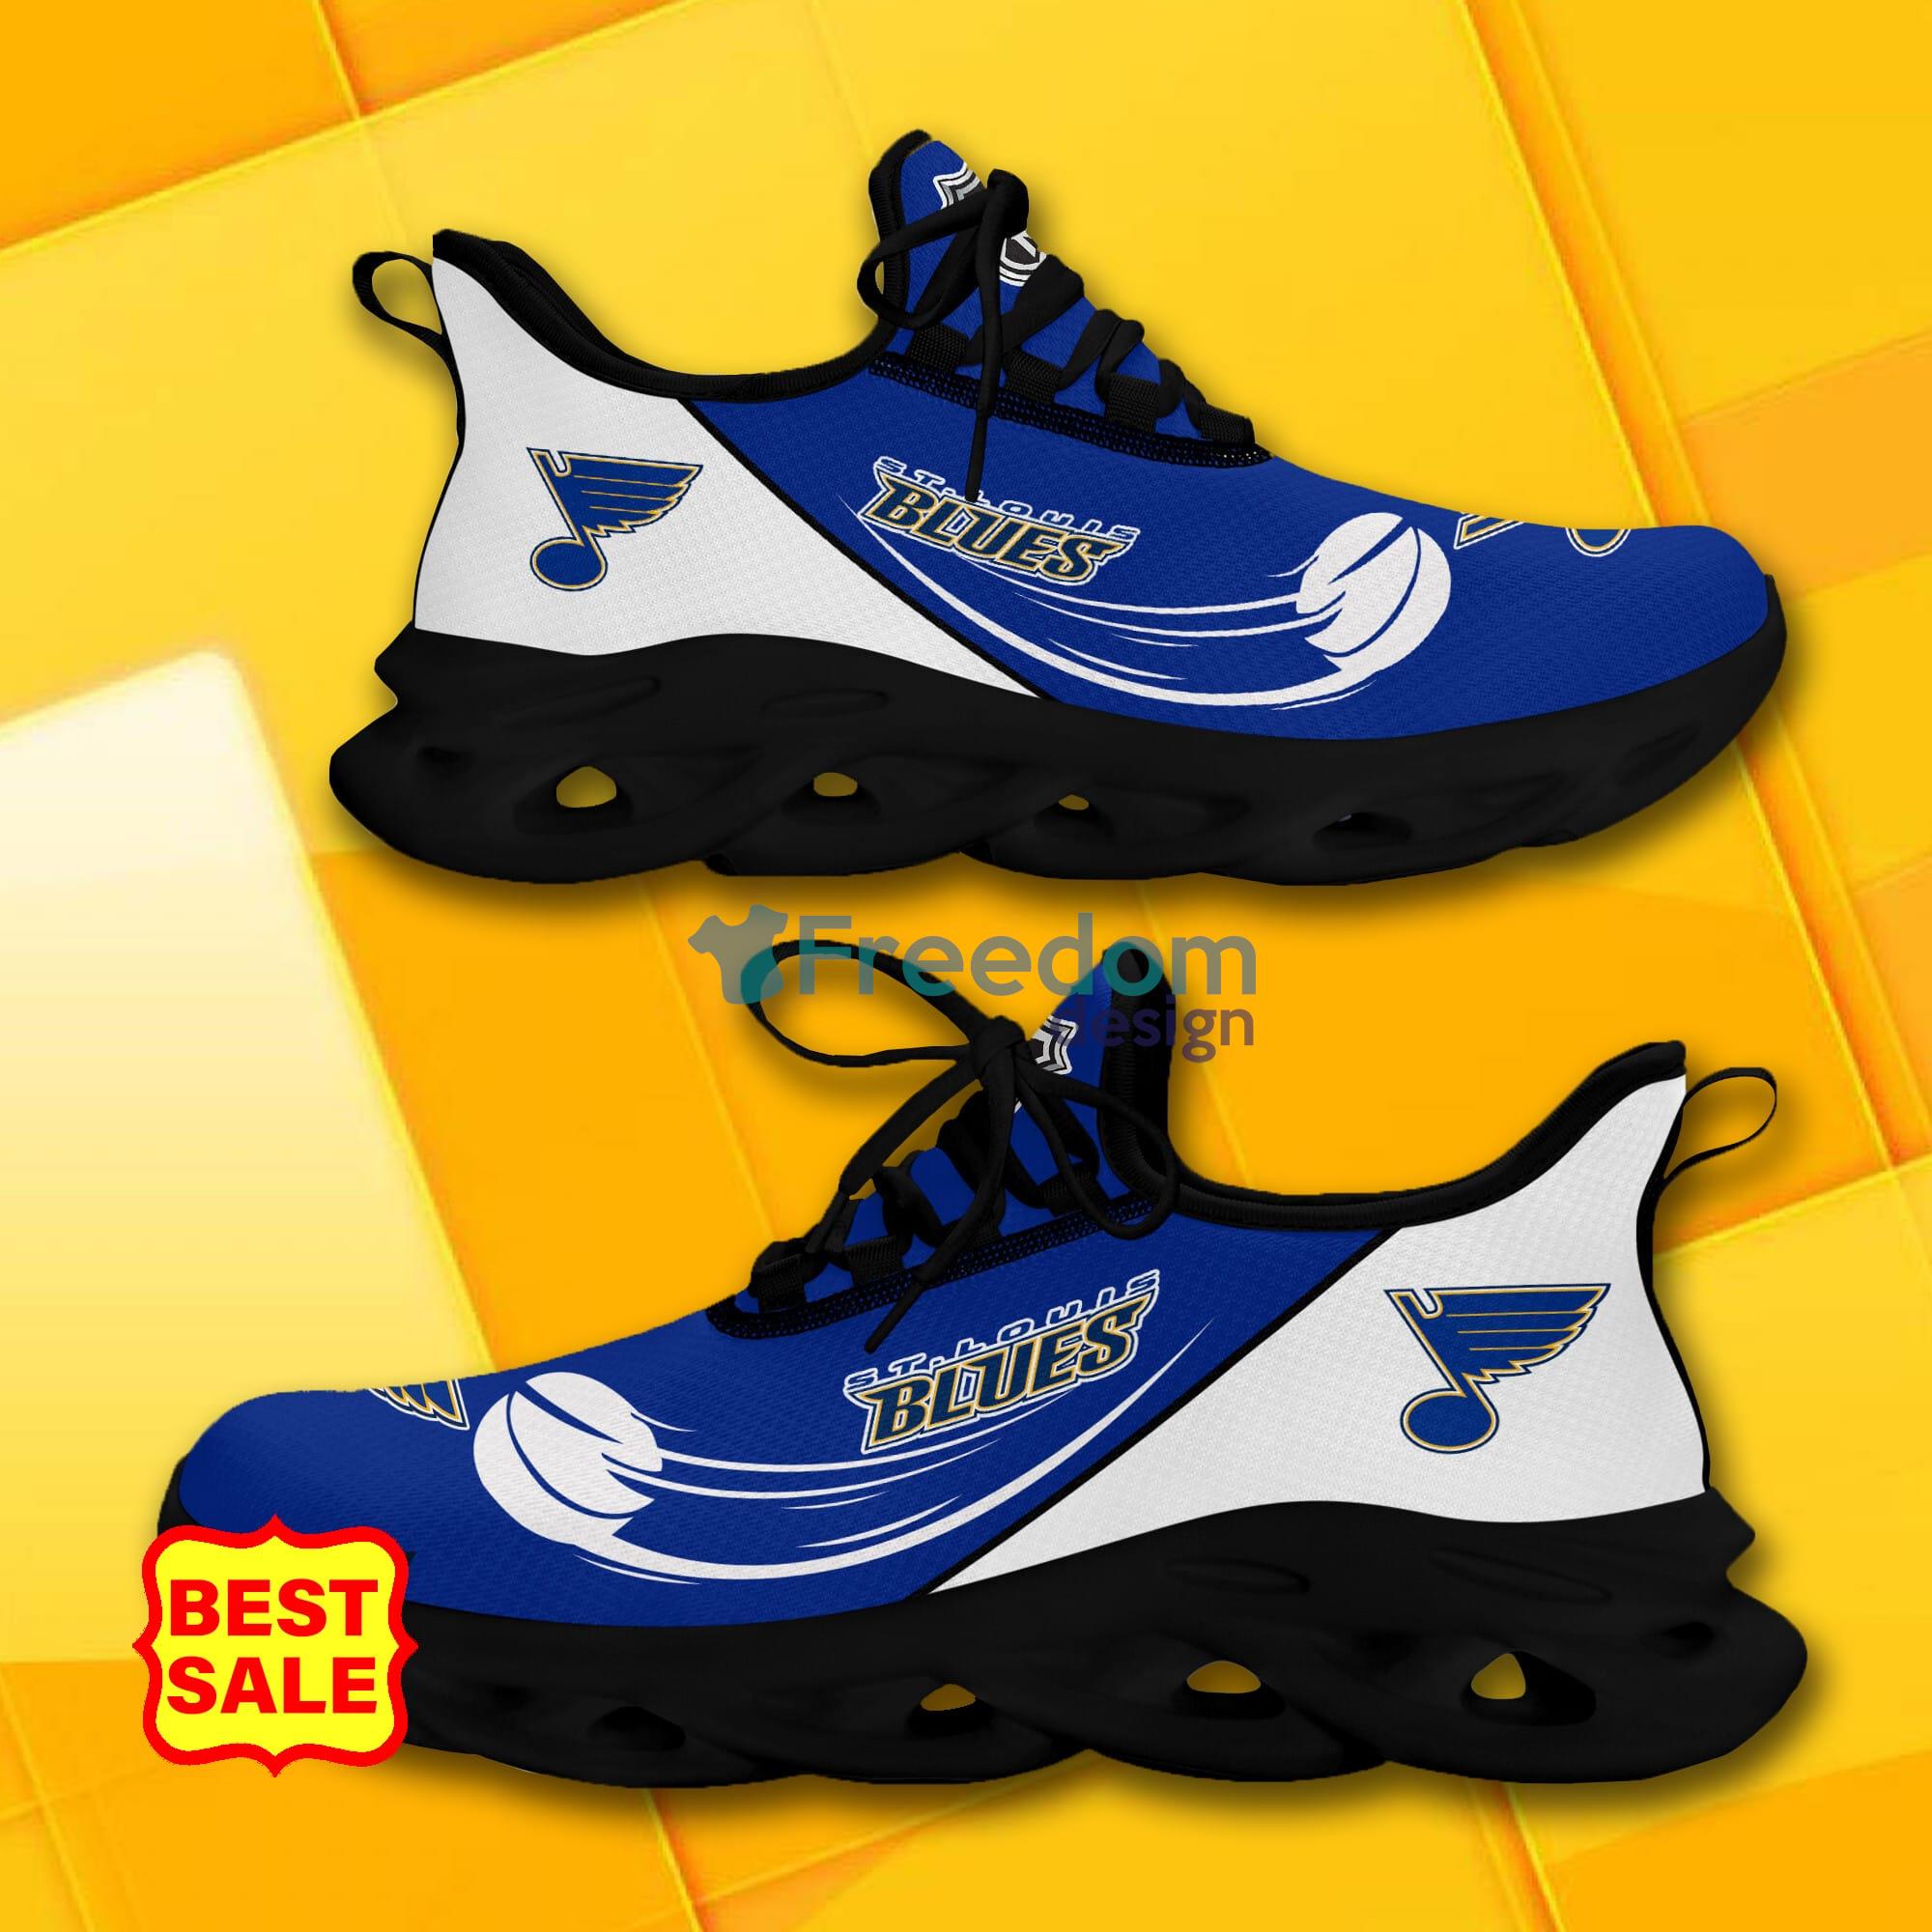 St Louis Blues Custom Name Personalized Max Soul Sneaker Running Sport  Shoes Men And Women Gift